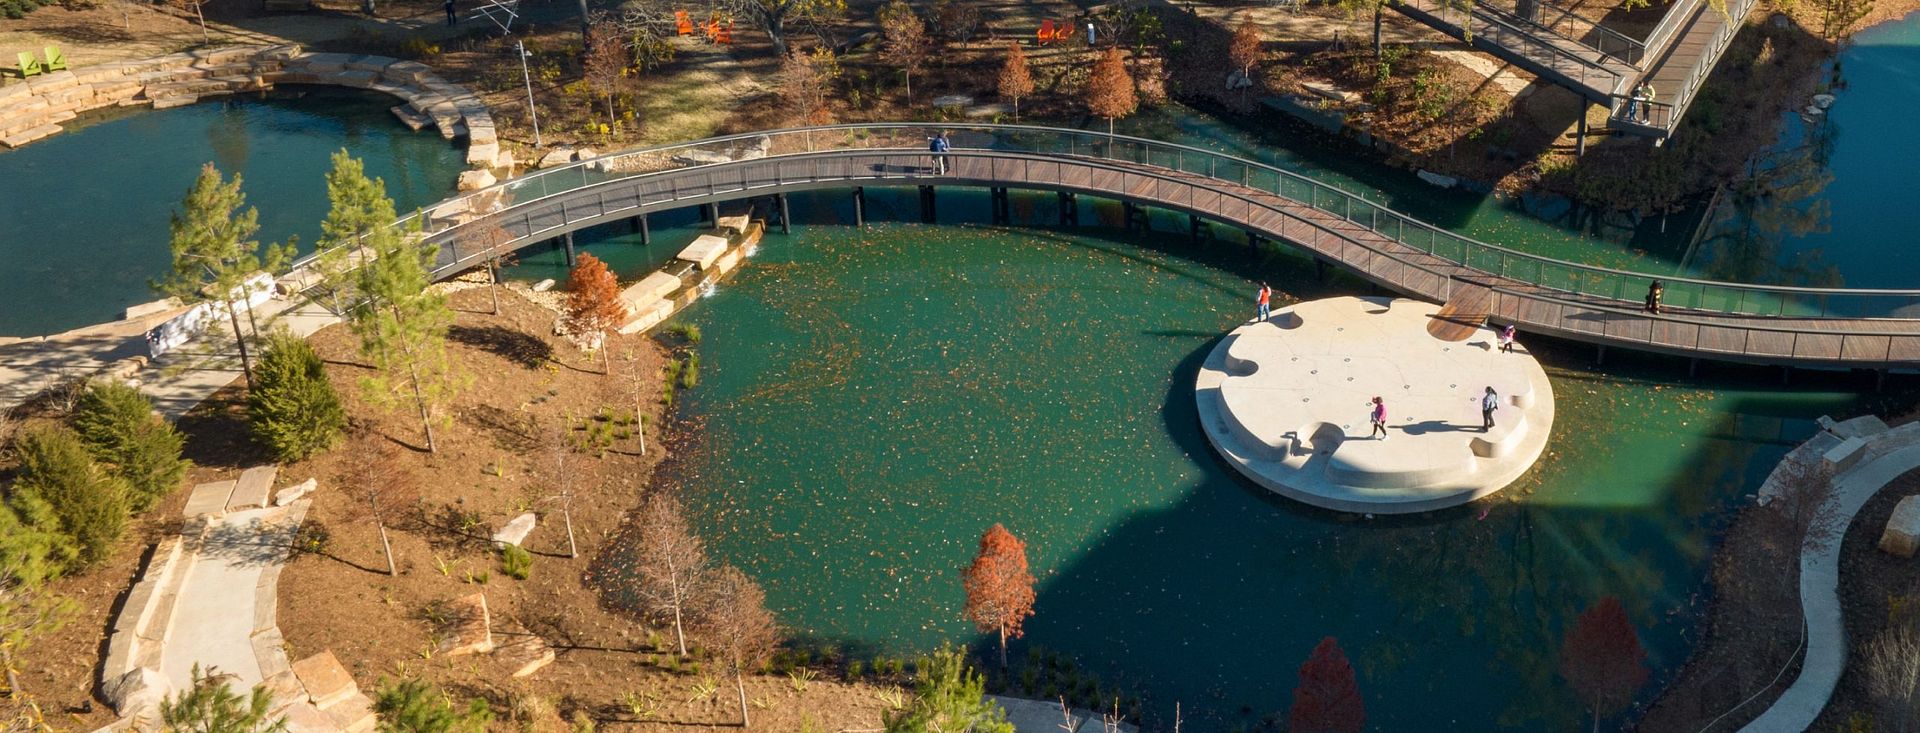 A pond with a bridge crossing it from above.